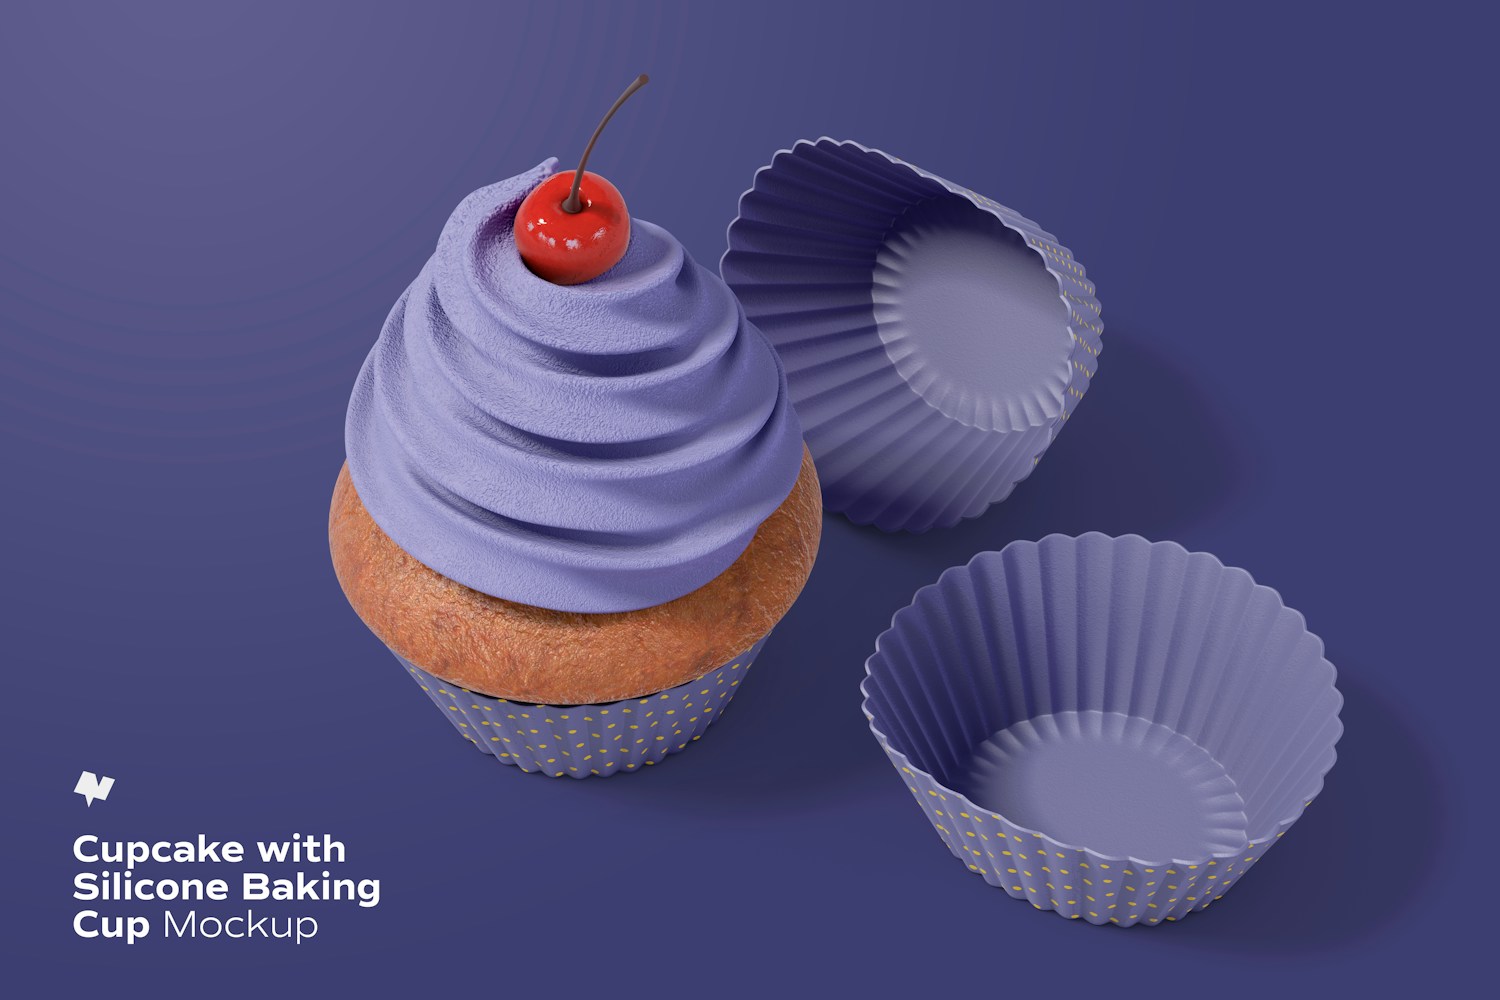 Personalize the cupcakes to your taste.